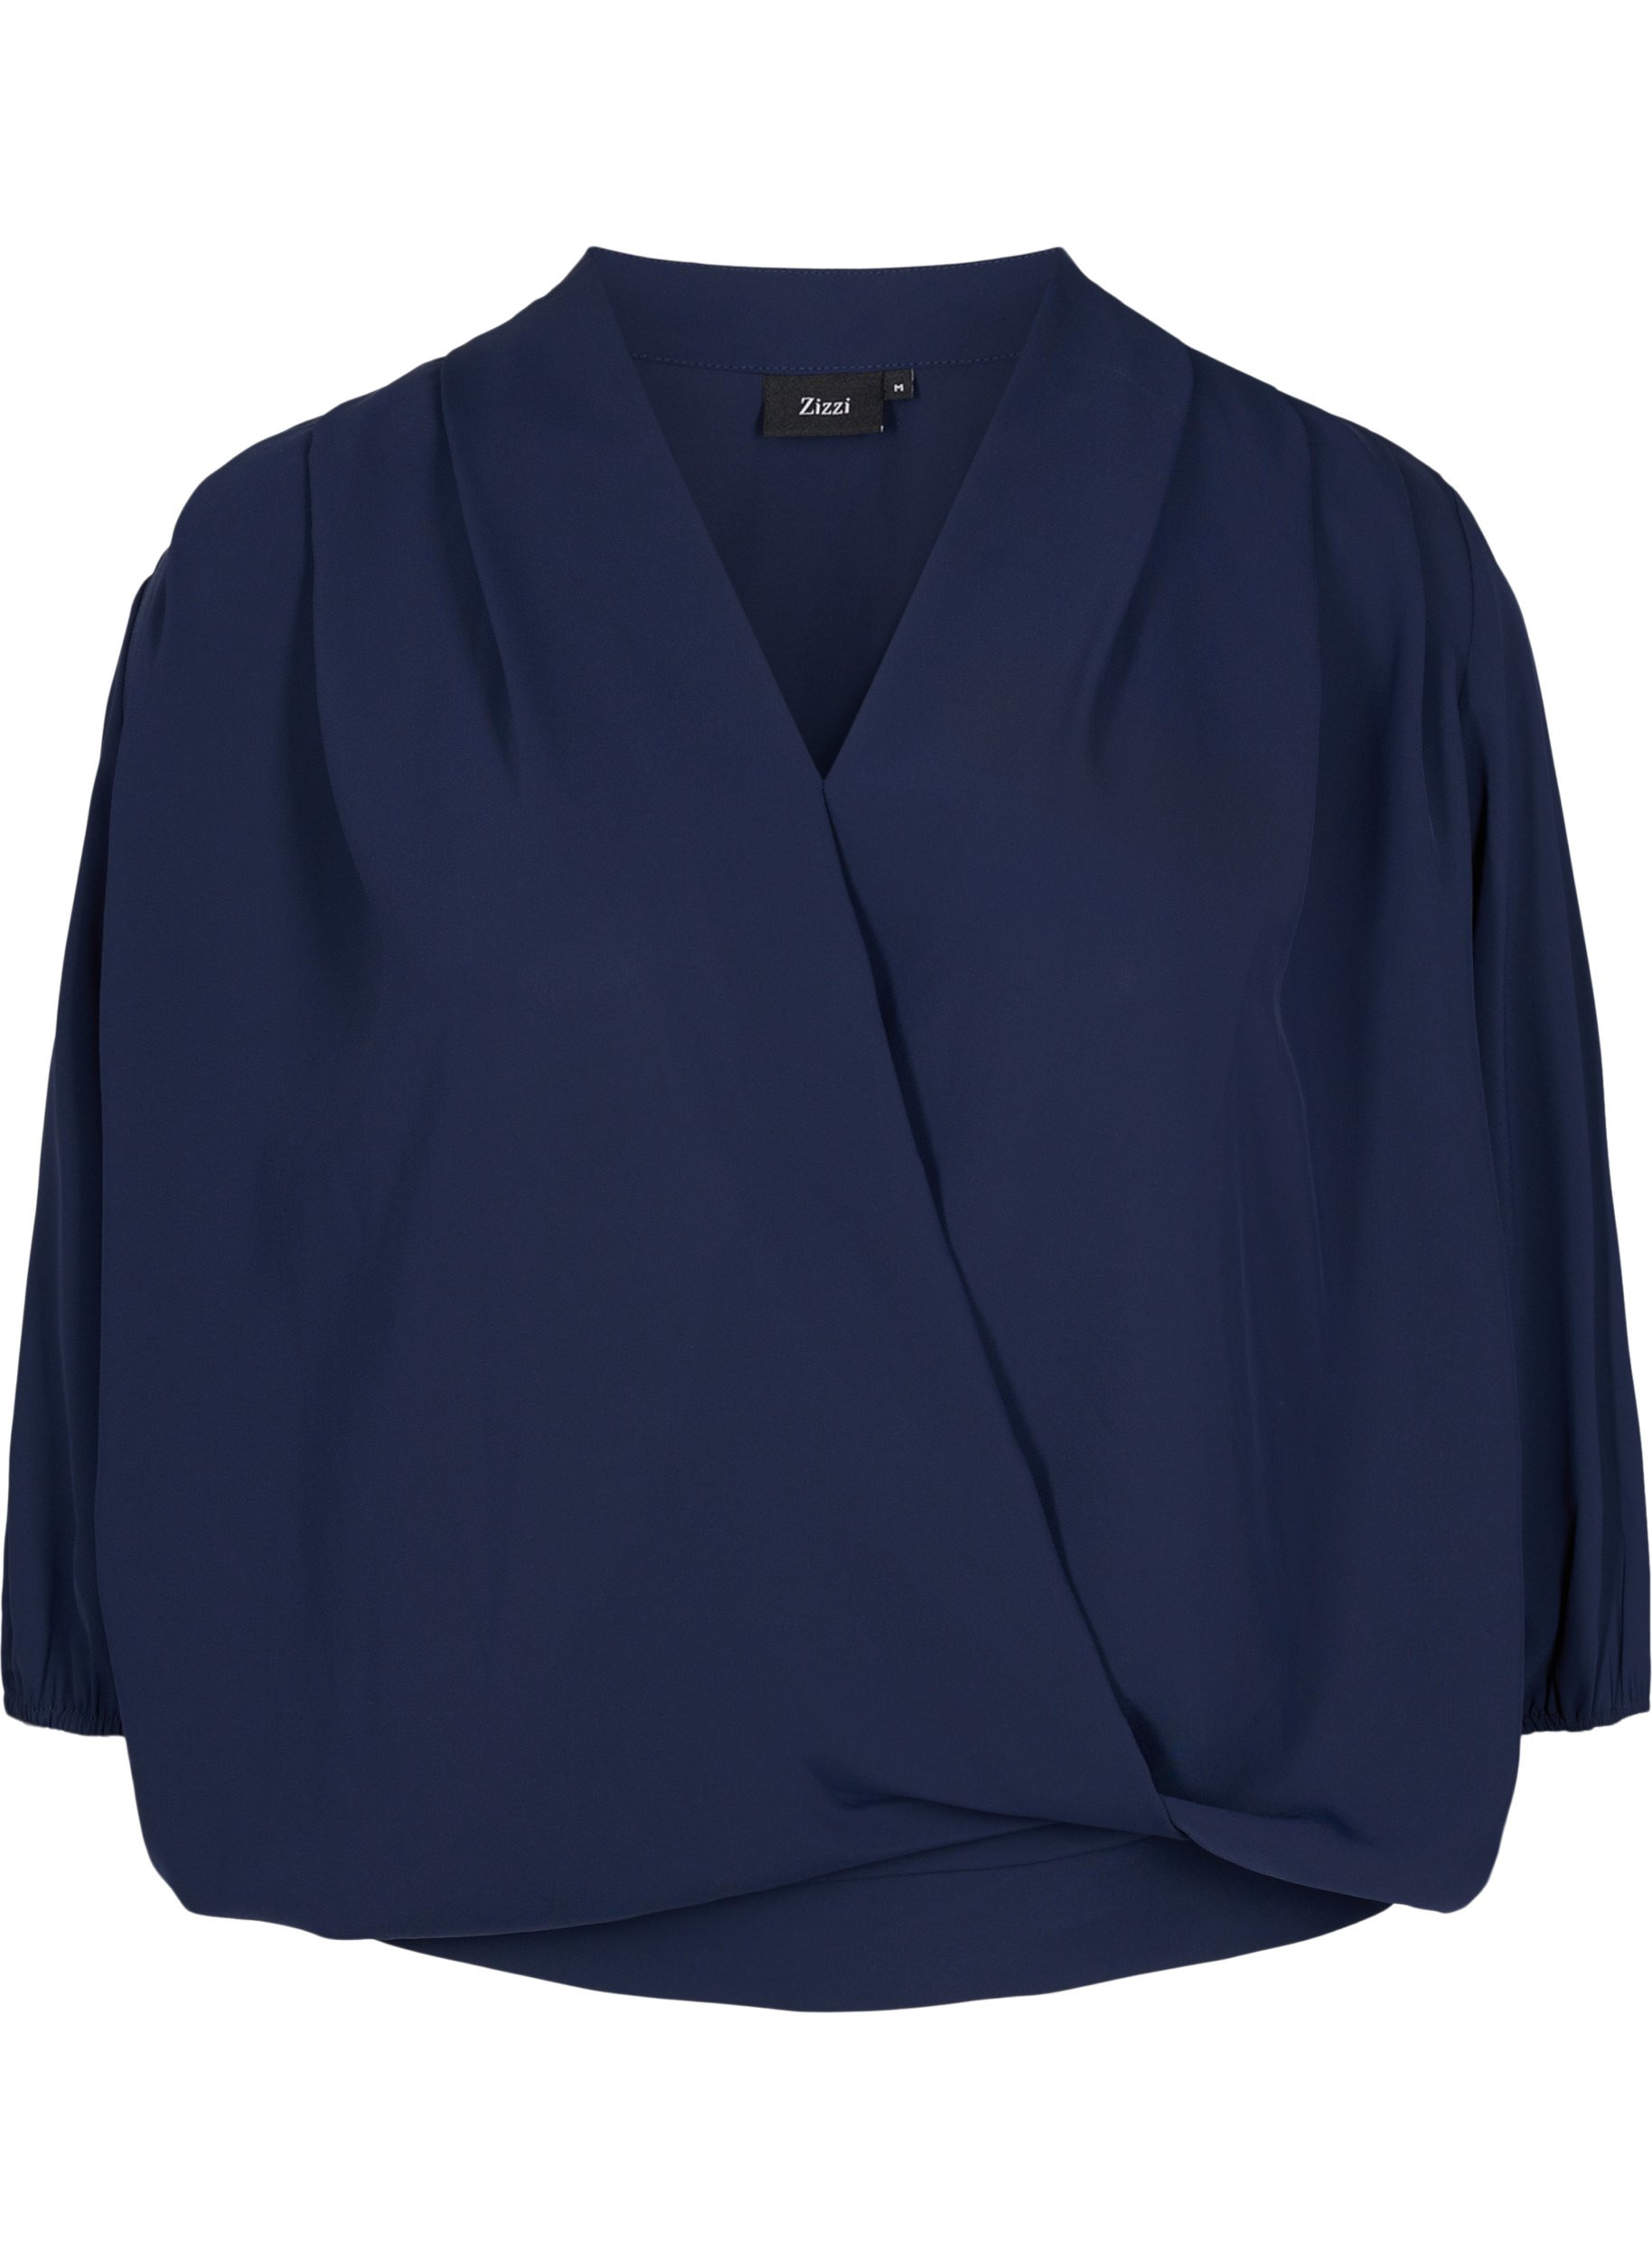 Wrap look blouse with v-neck and 3/4 sleeves, Navy Blazer, Packshot image number 0